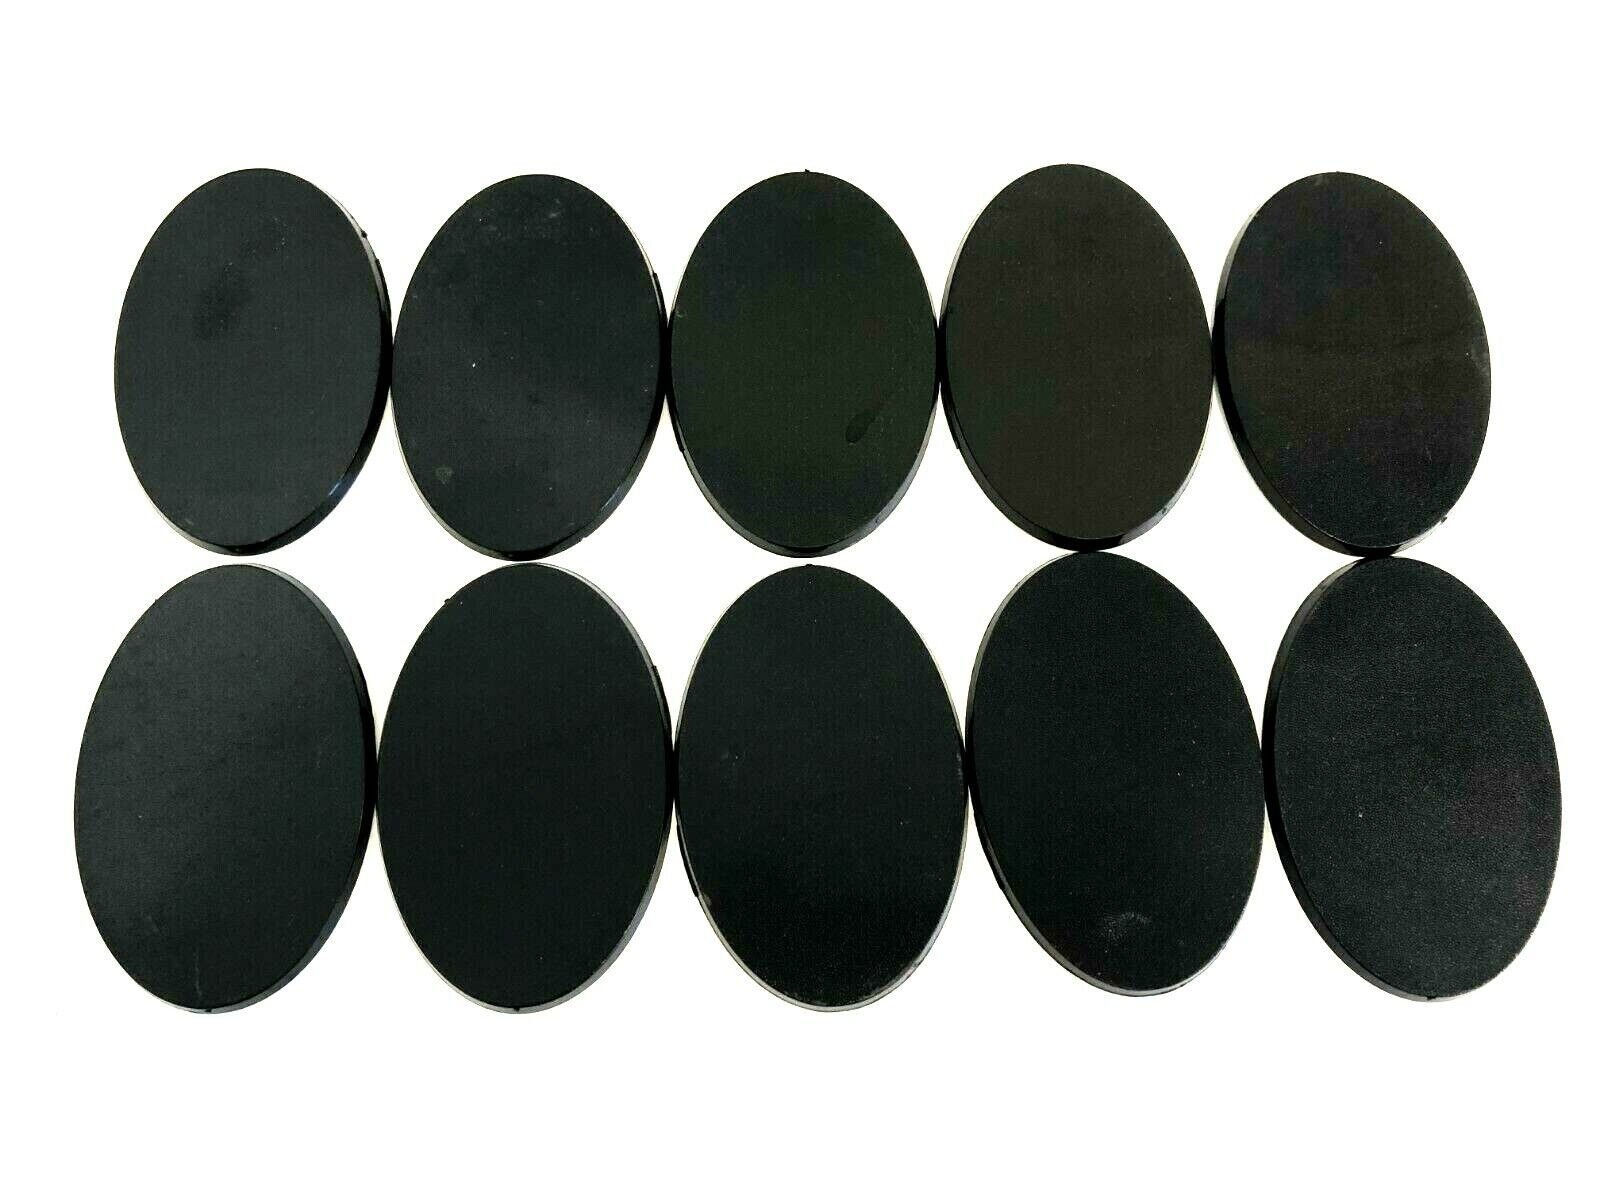 Lot of 10 60mm x 35mm Oval Bases For Warhammer 40k & AoS Games Workshop Arquebus Unbranded does not apply